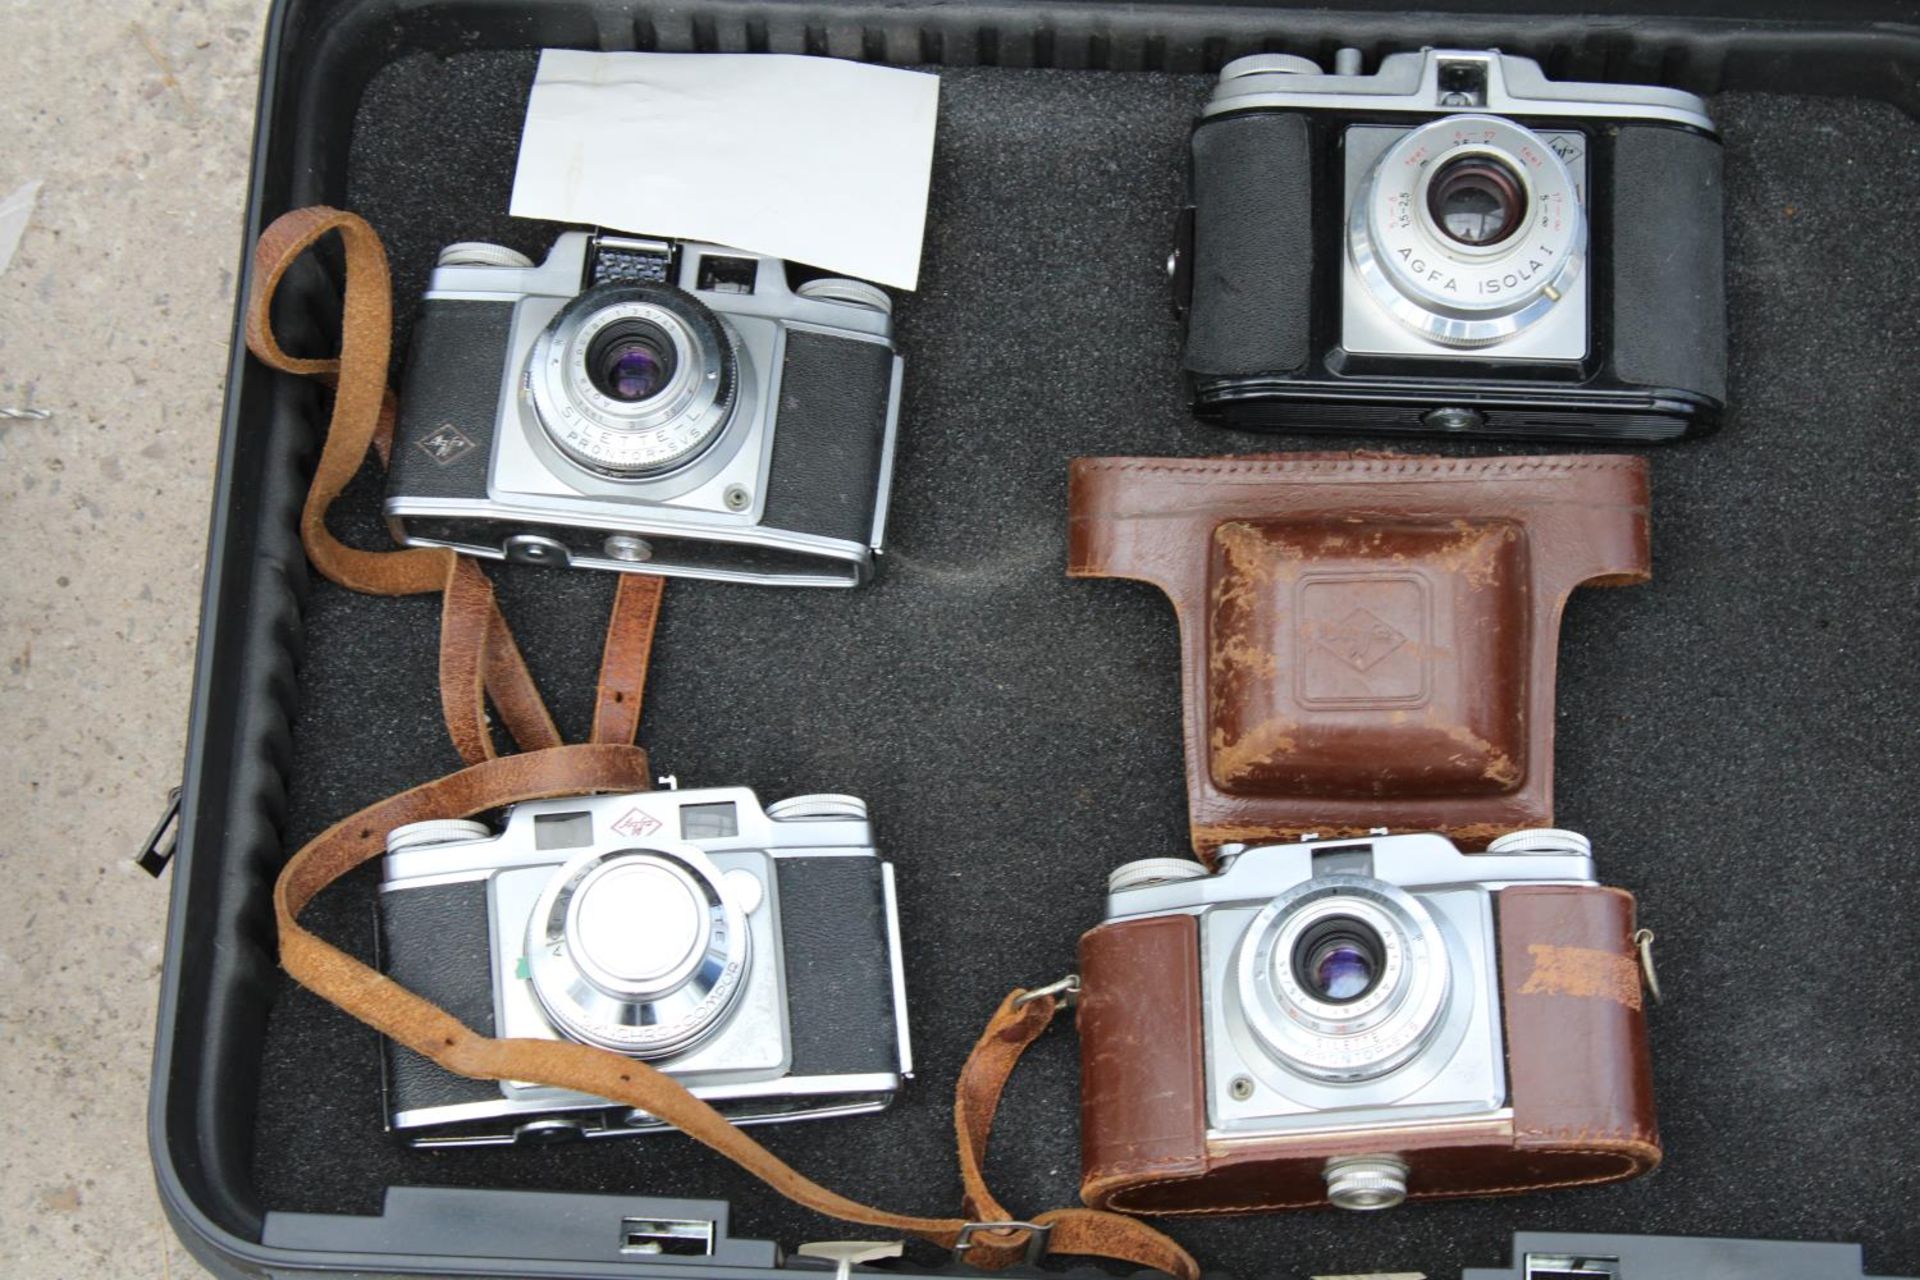 SIX VARIOUS AGFA CAMERAS IN A HARD CARRY CASE - Image 2 of 3